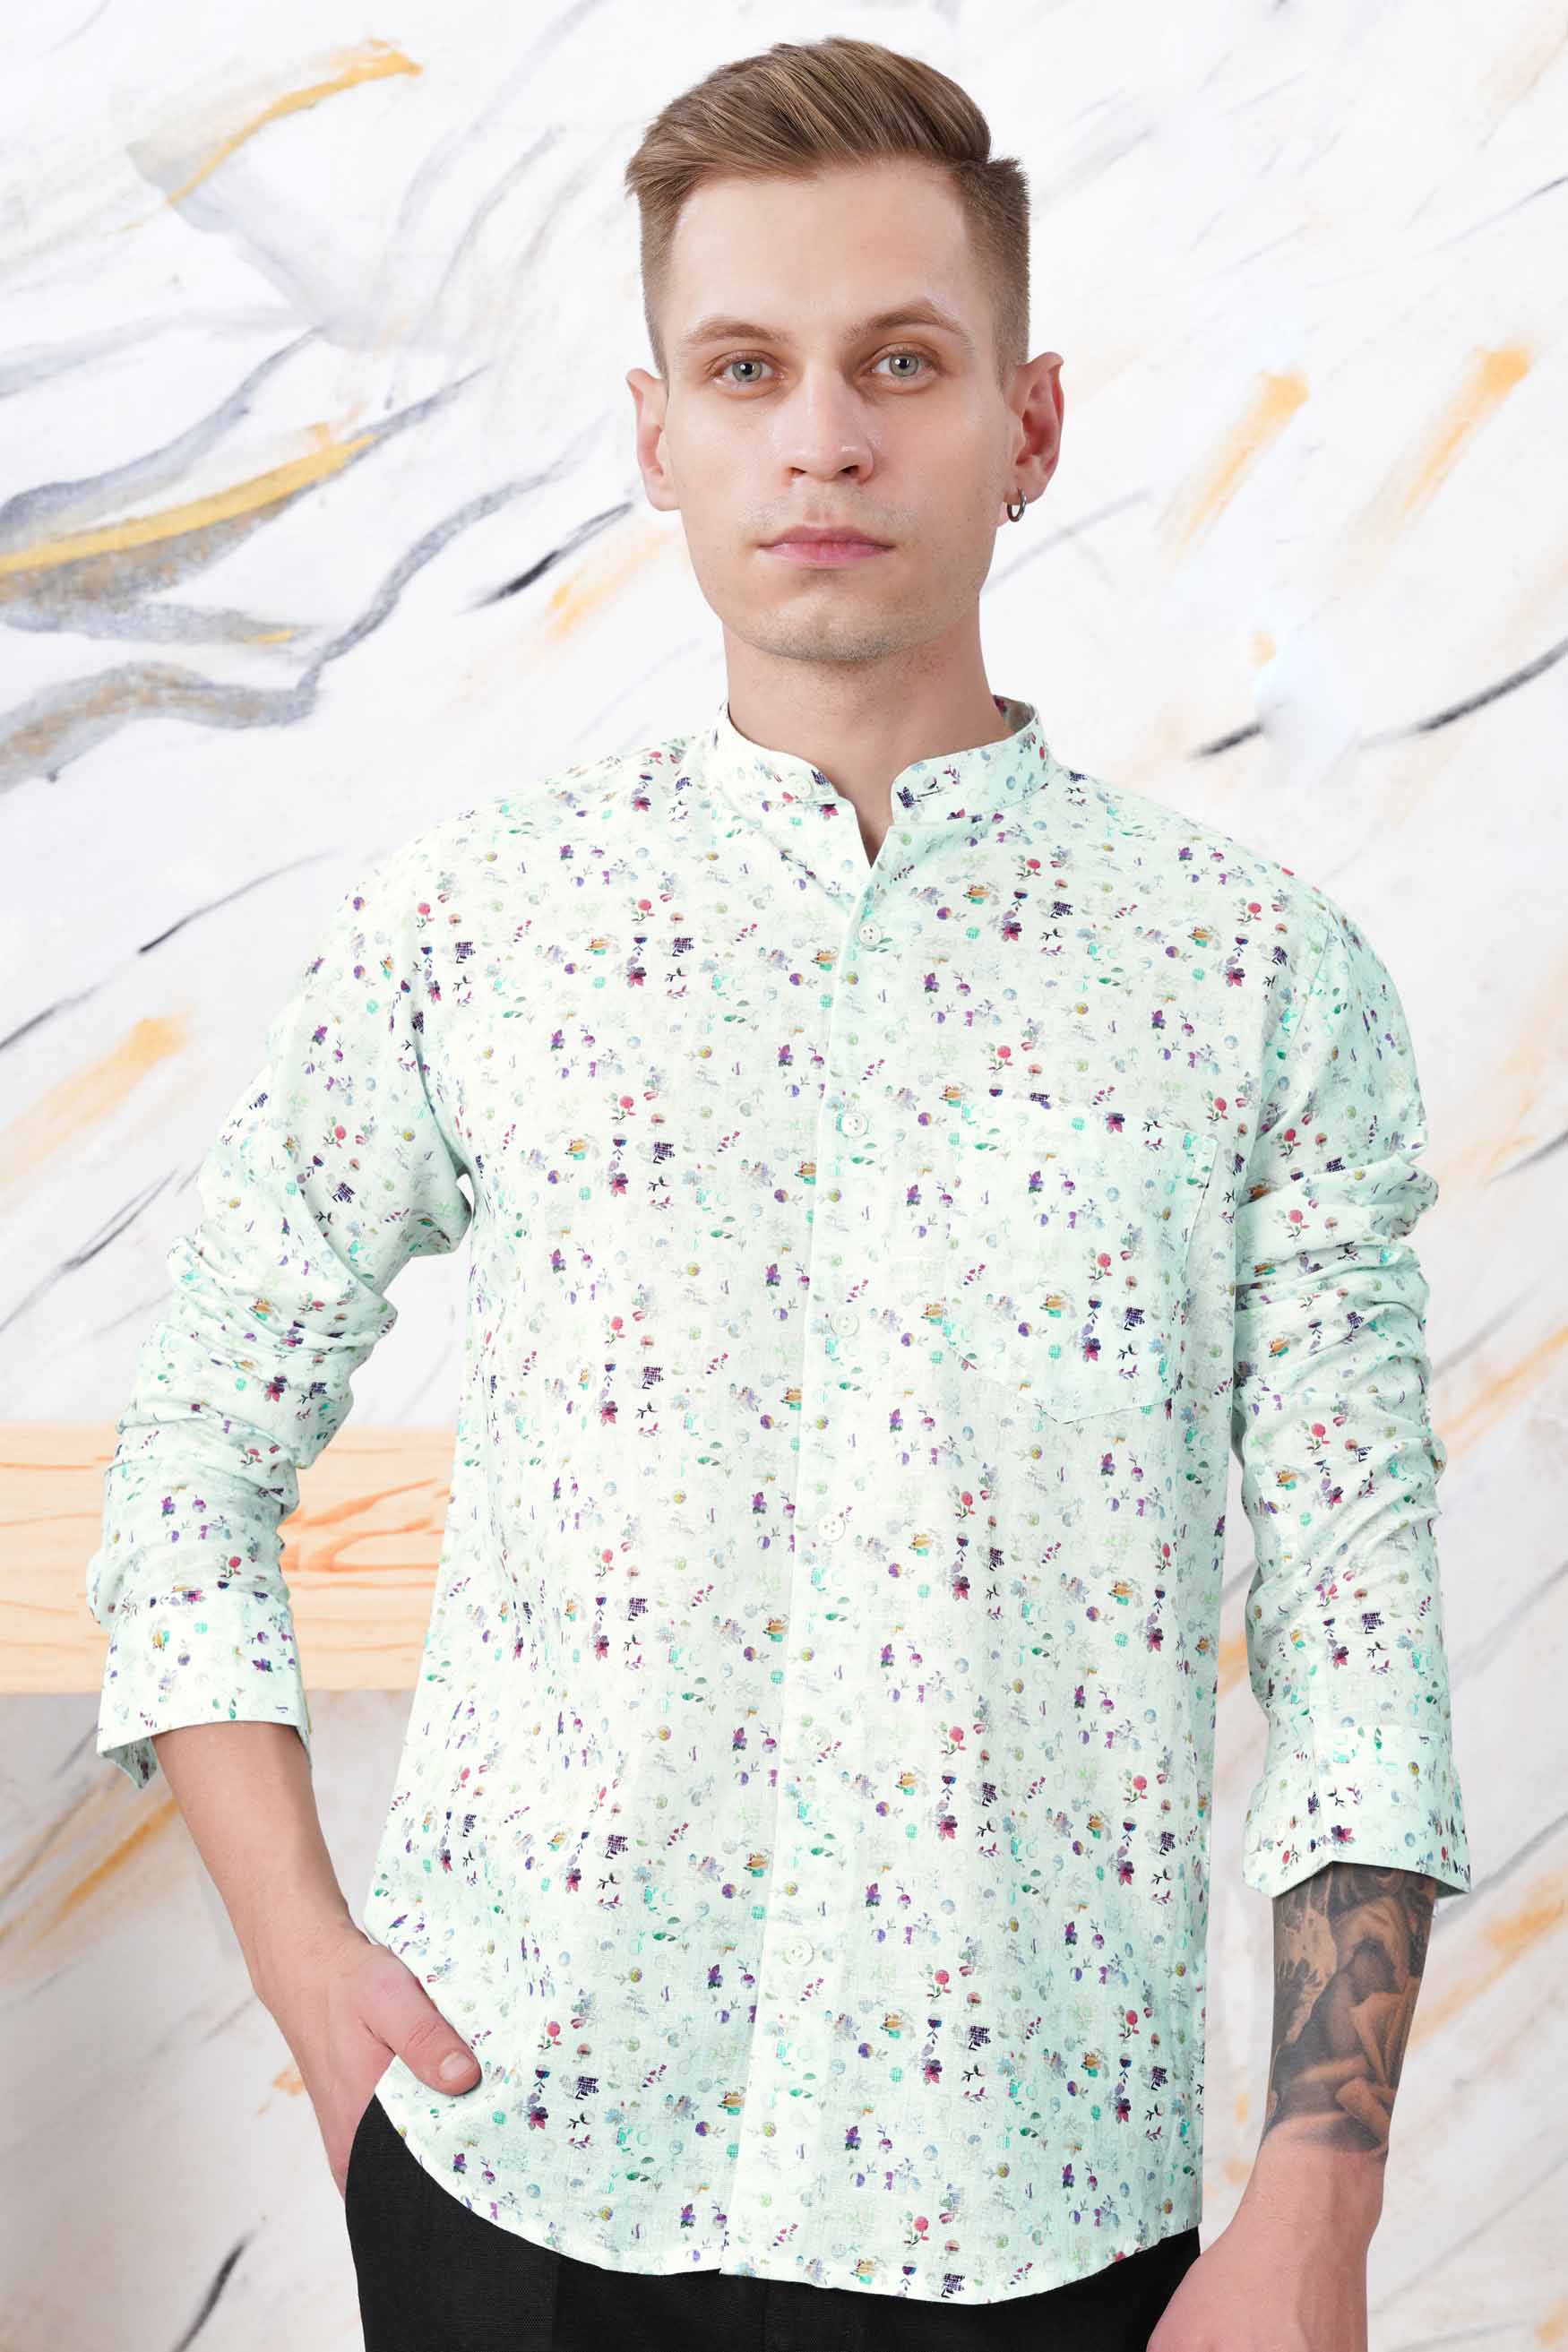 Surf Green with Multicolour Ditsy Printed Luxurious Linen Shirt 11579-BC-38, 11579-BC-H-38, 11579-BC-39, 11579-BC-H-39, 11579-BC-40, 11579-BC-H-40, 11579-BC-42, 11579-BC-H-42, 11579-BC-44, 11579-BC-H-44, 11579-BC-46, 11579-BC-H-46, 11579-BC-48, 11579-BC-H-48, 11579-BC-50, 11579-BC-H-50, 11579-BC-52, 11579-BC-H-52